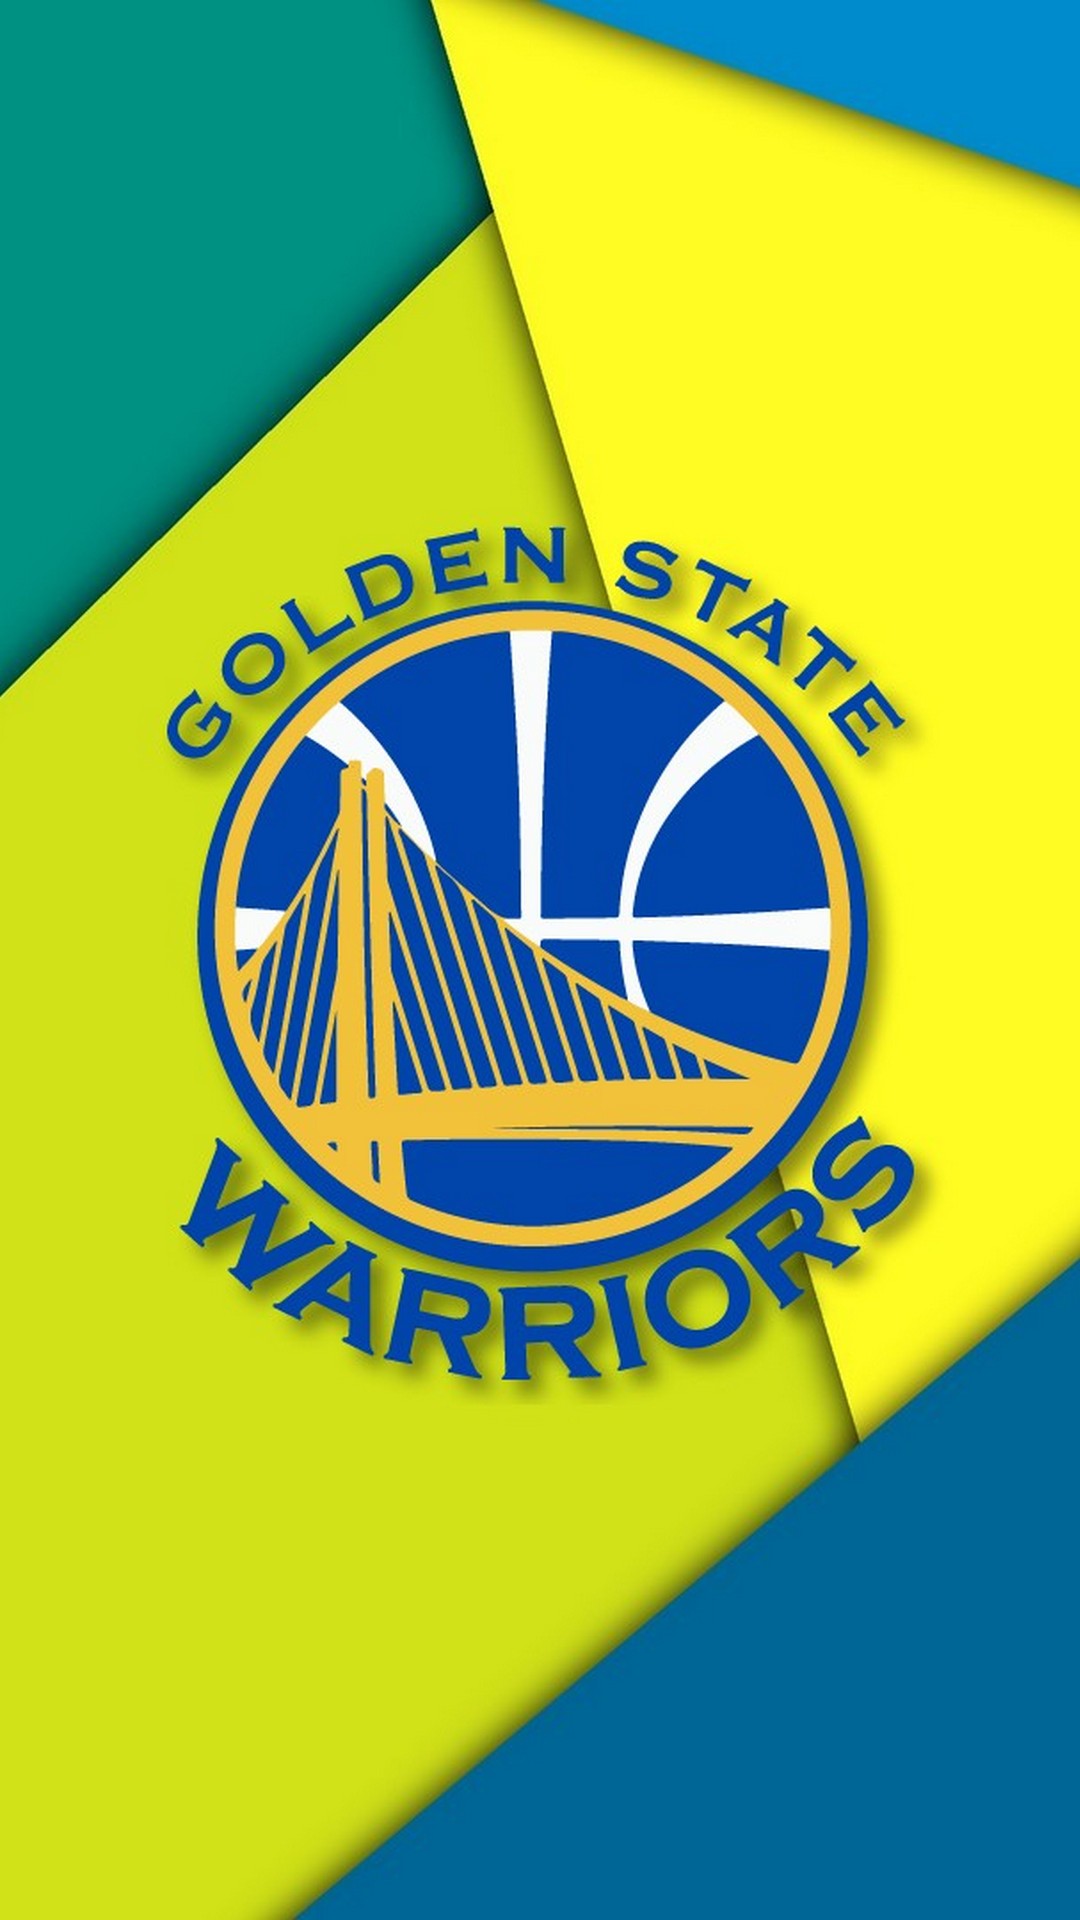 iPhone Wallpaper Golden State Warriors with resolution 1080X1920 pixel. You can make this wallpaper for your iPhone 5, 6, 7, 8, X backgrounds, Mobile Screensaver, or iPad Lock Screen